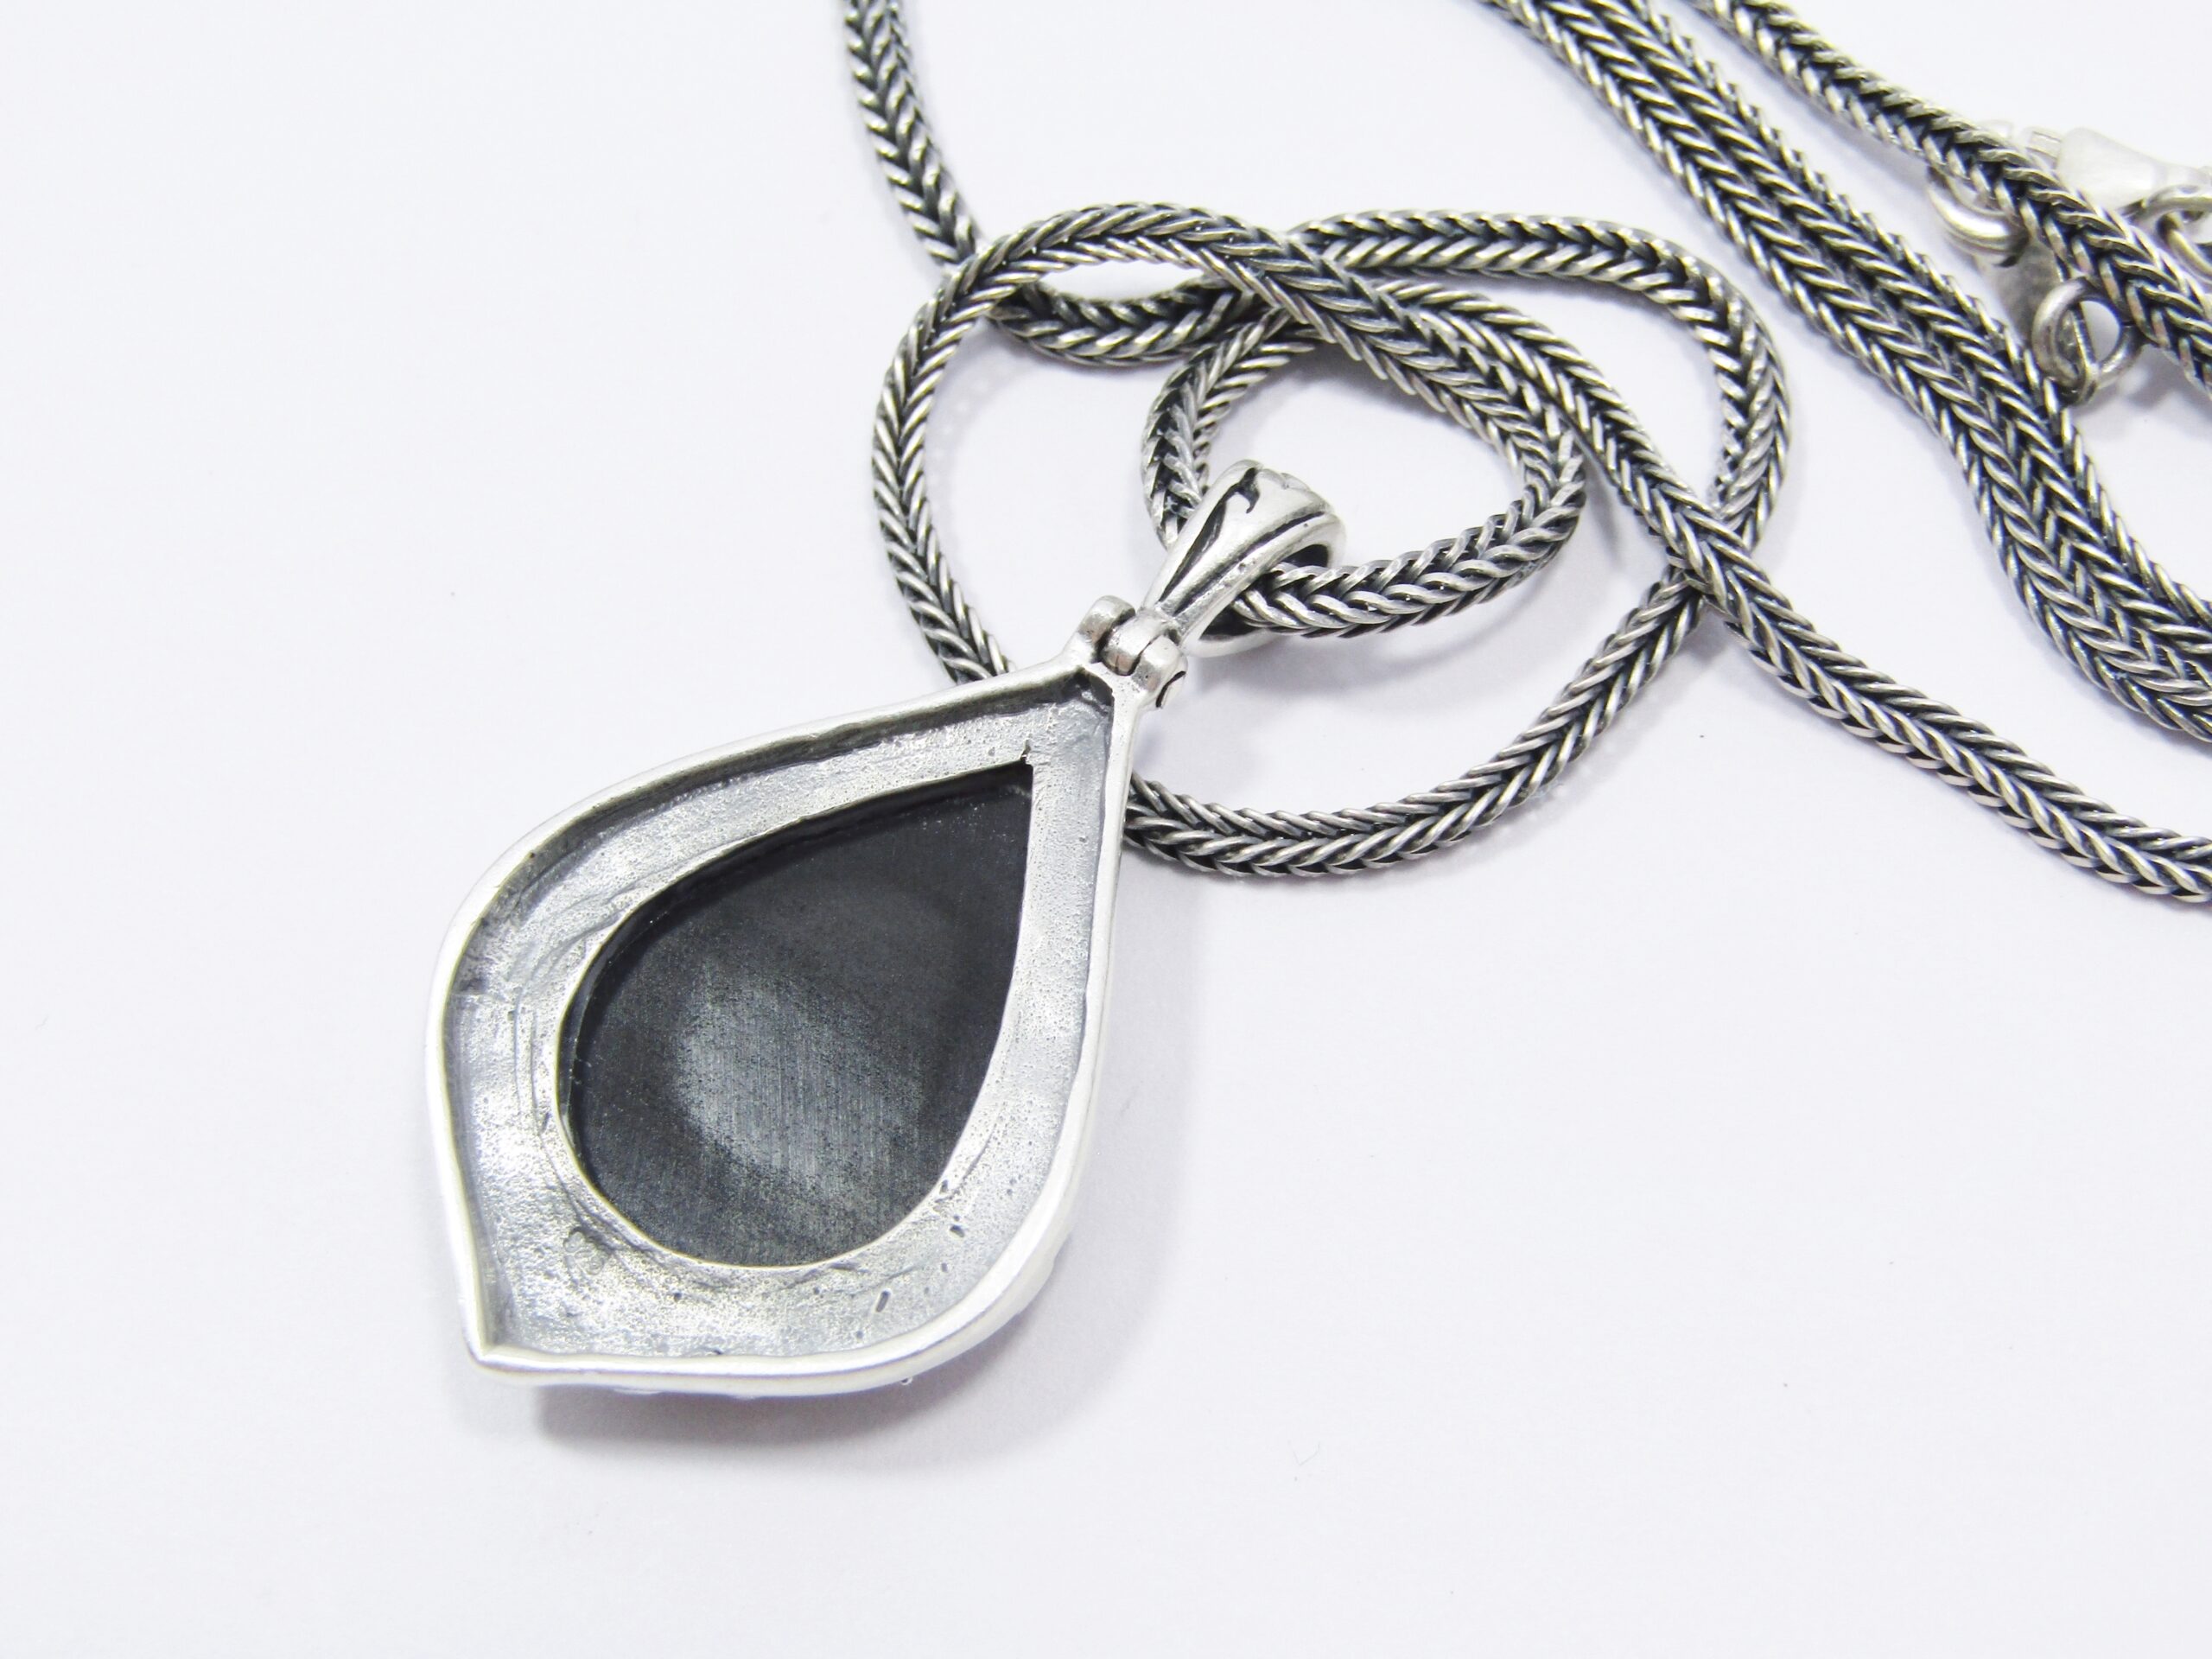 A Beautiful Vintage Design Black Stone Pendant on Chain in Sterling Silver.